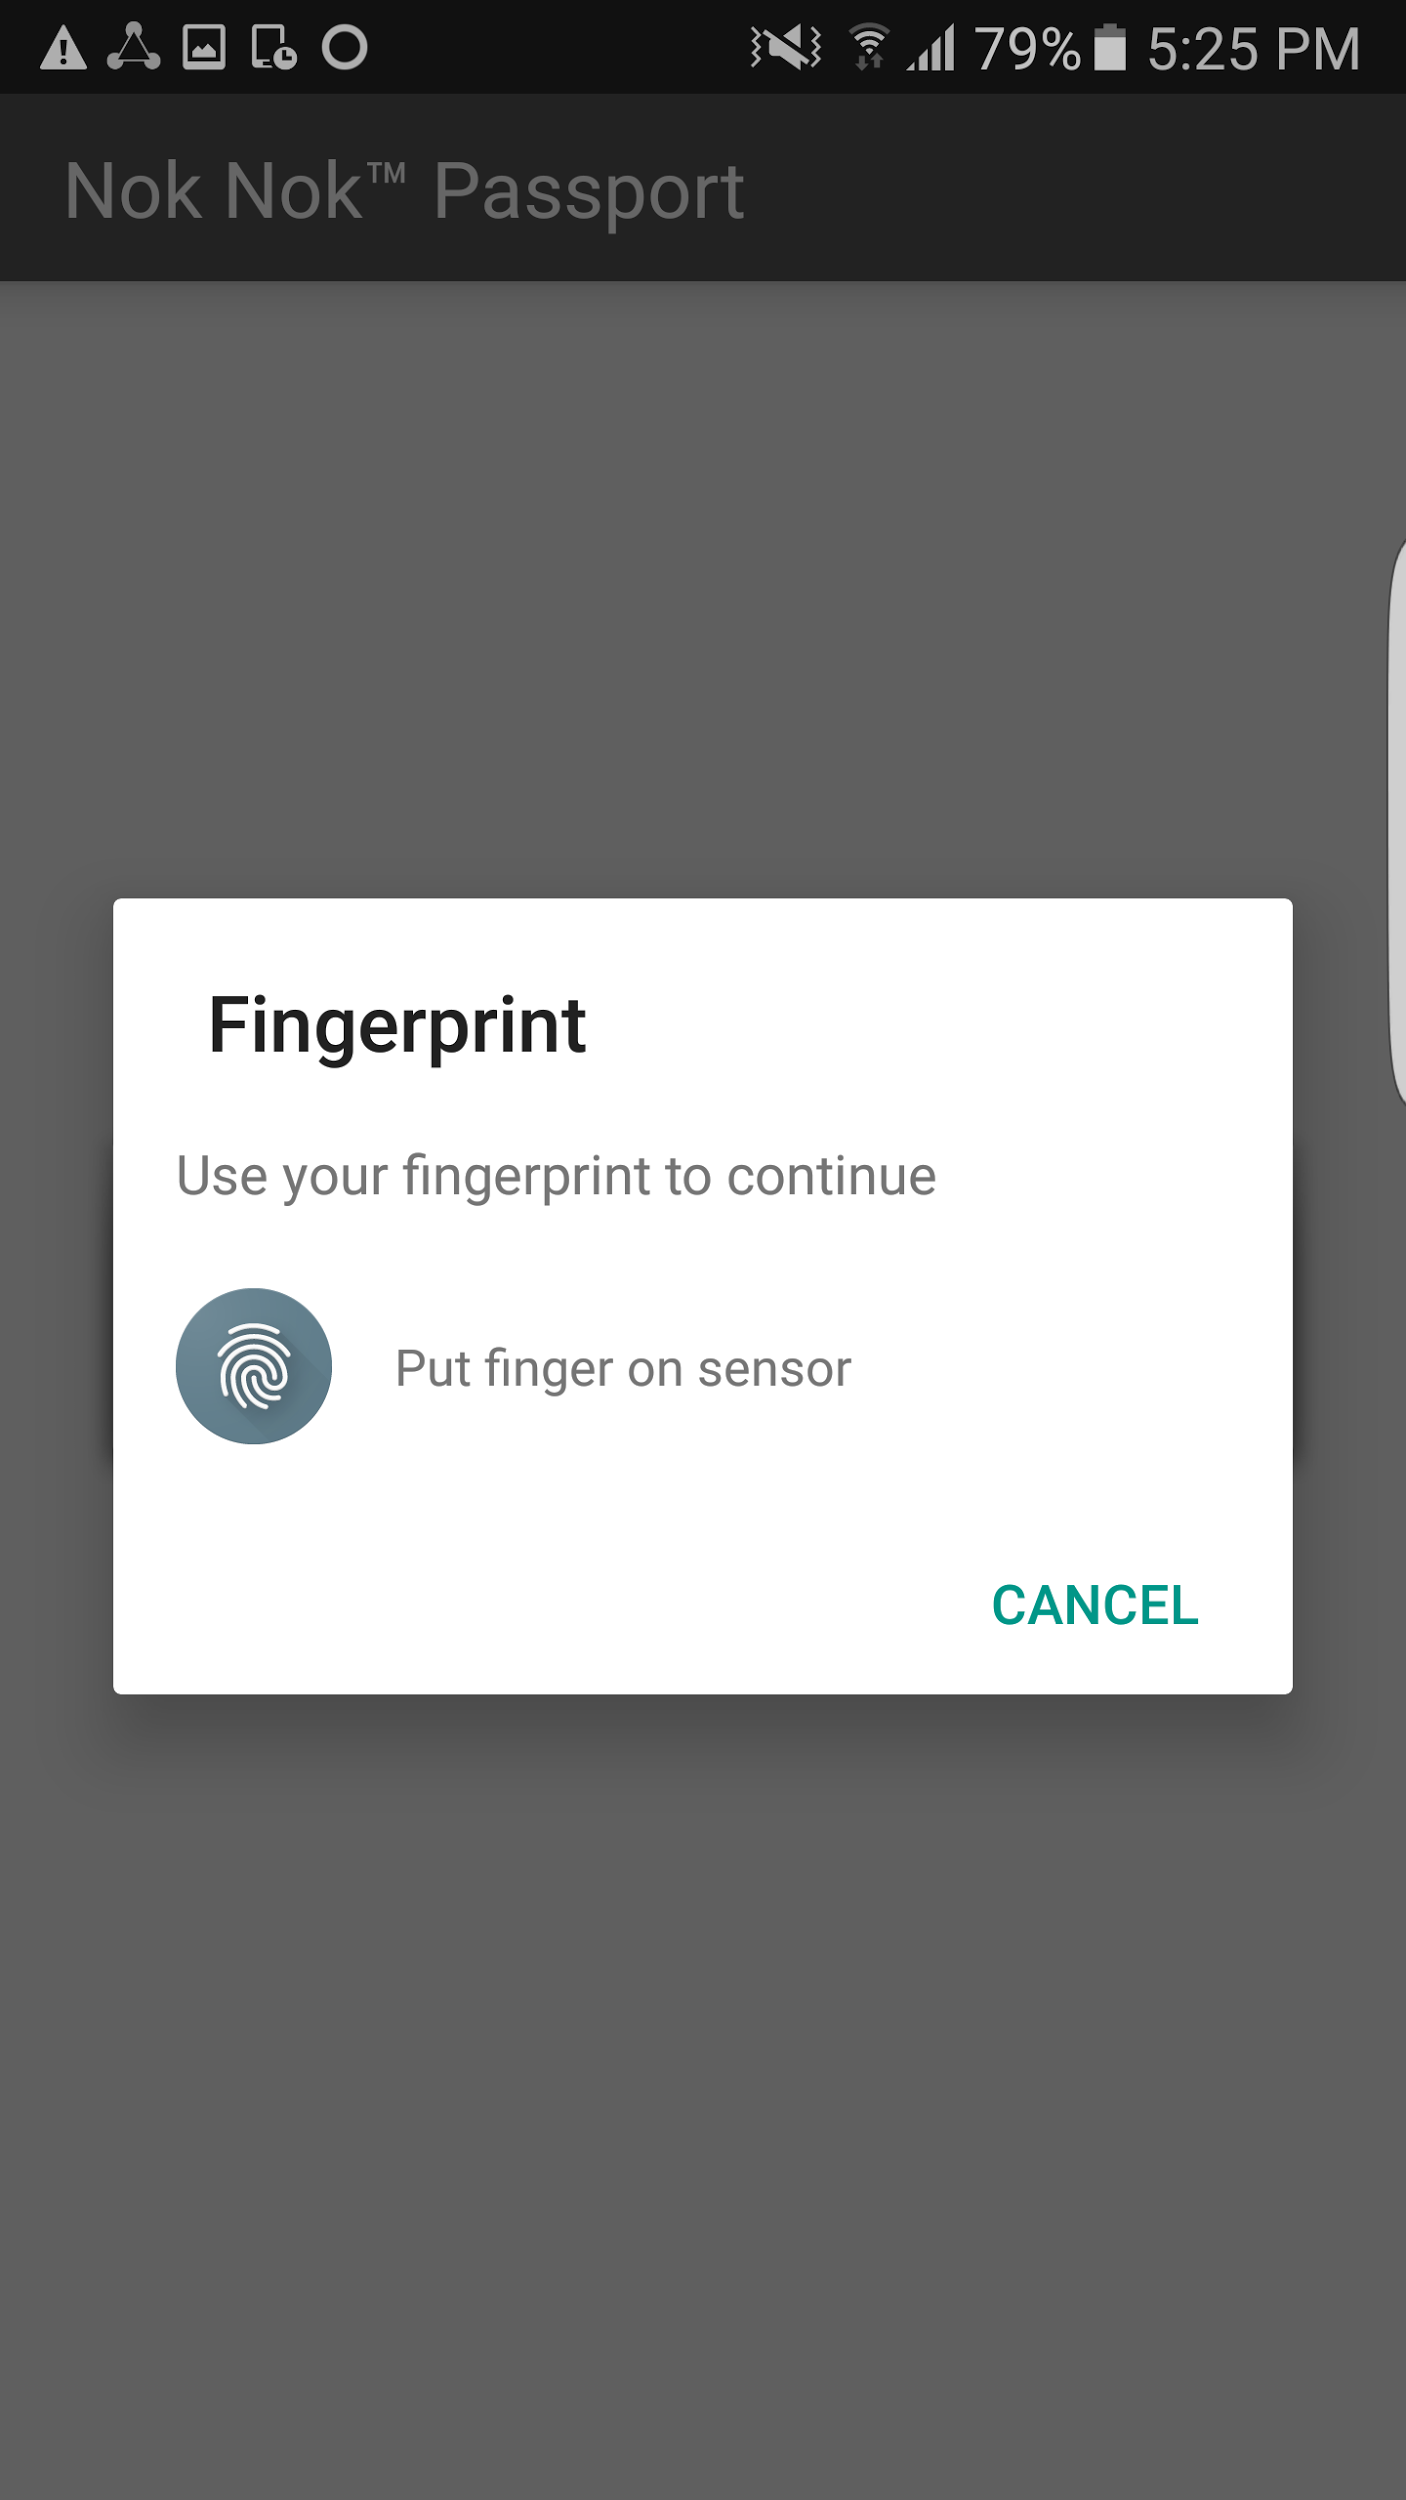 This figure shows a user of an Android device being prompted to do a fingerprint scan.